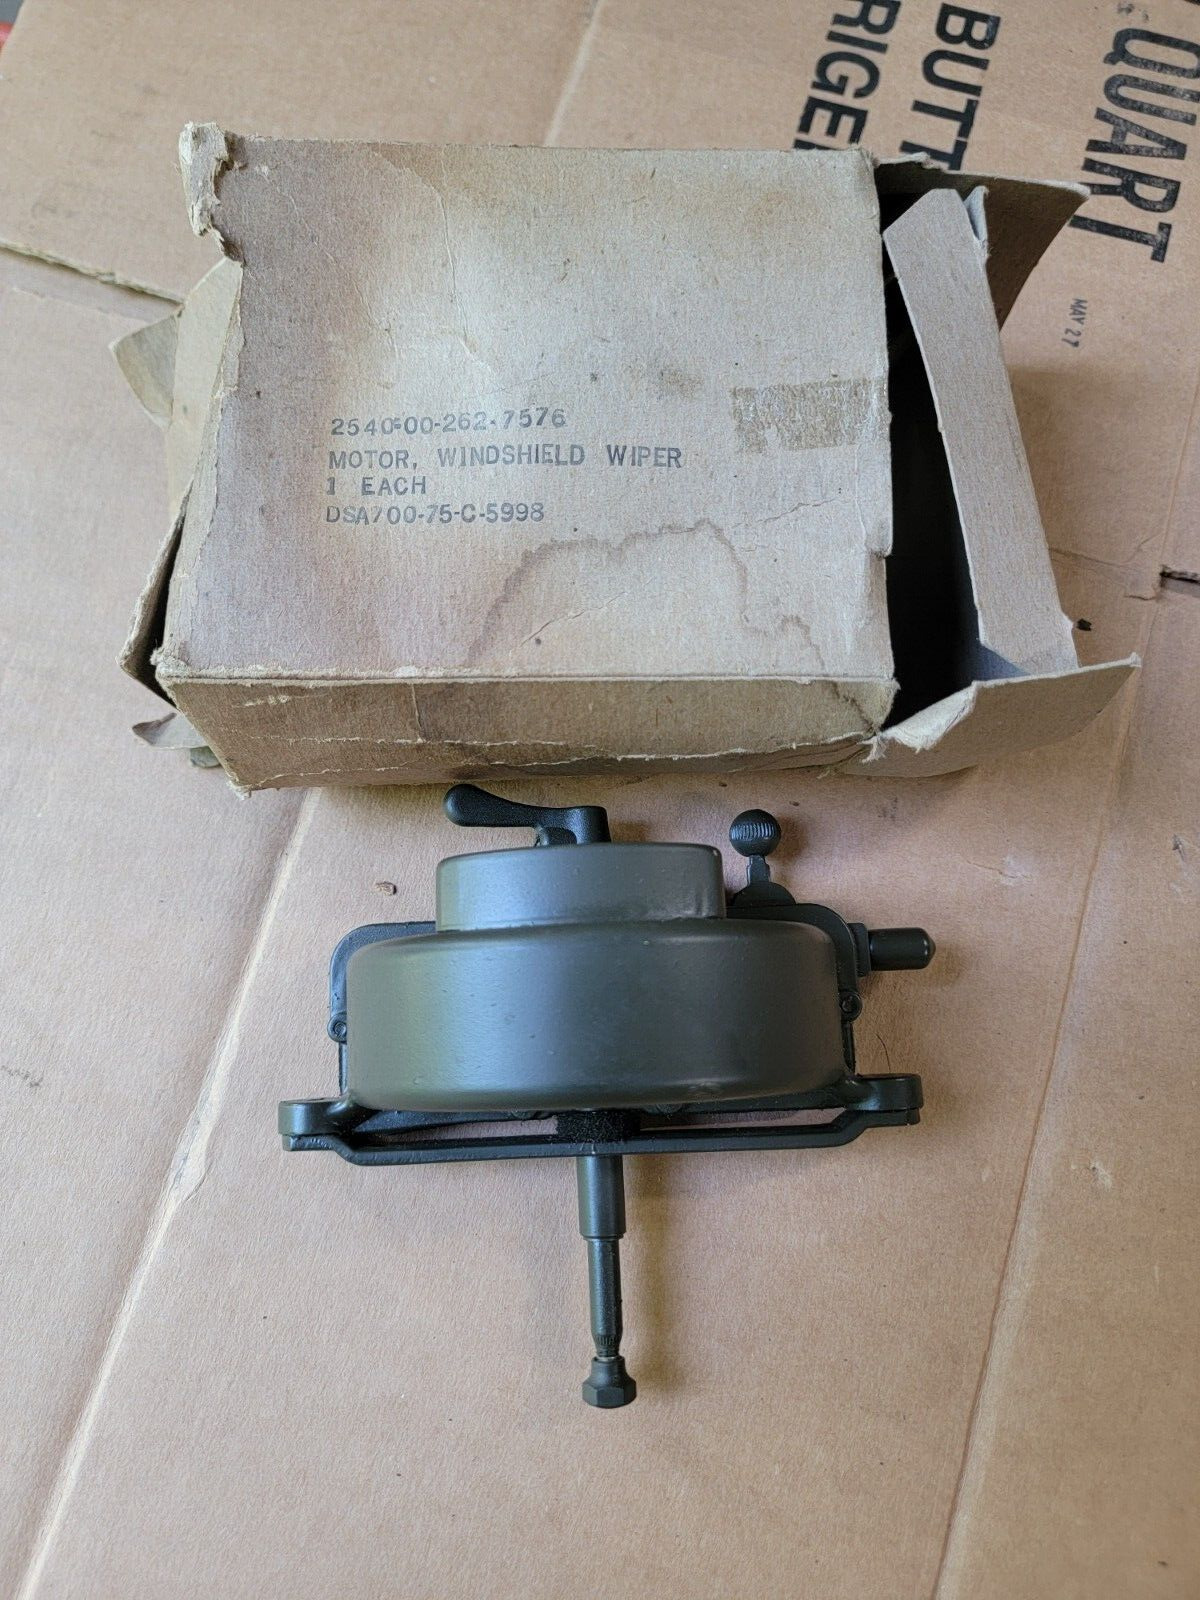 NOS Trico S583 Vacuum Wiper Motor WW2 Willys MB Ford GPW 2540-262-7576 Jeep G503